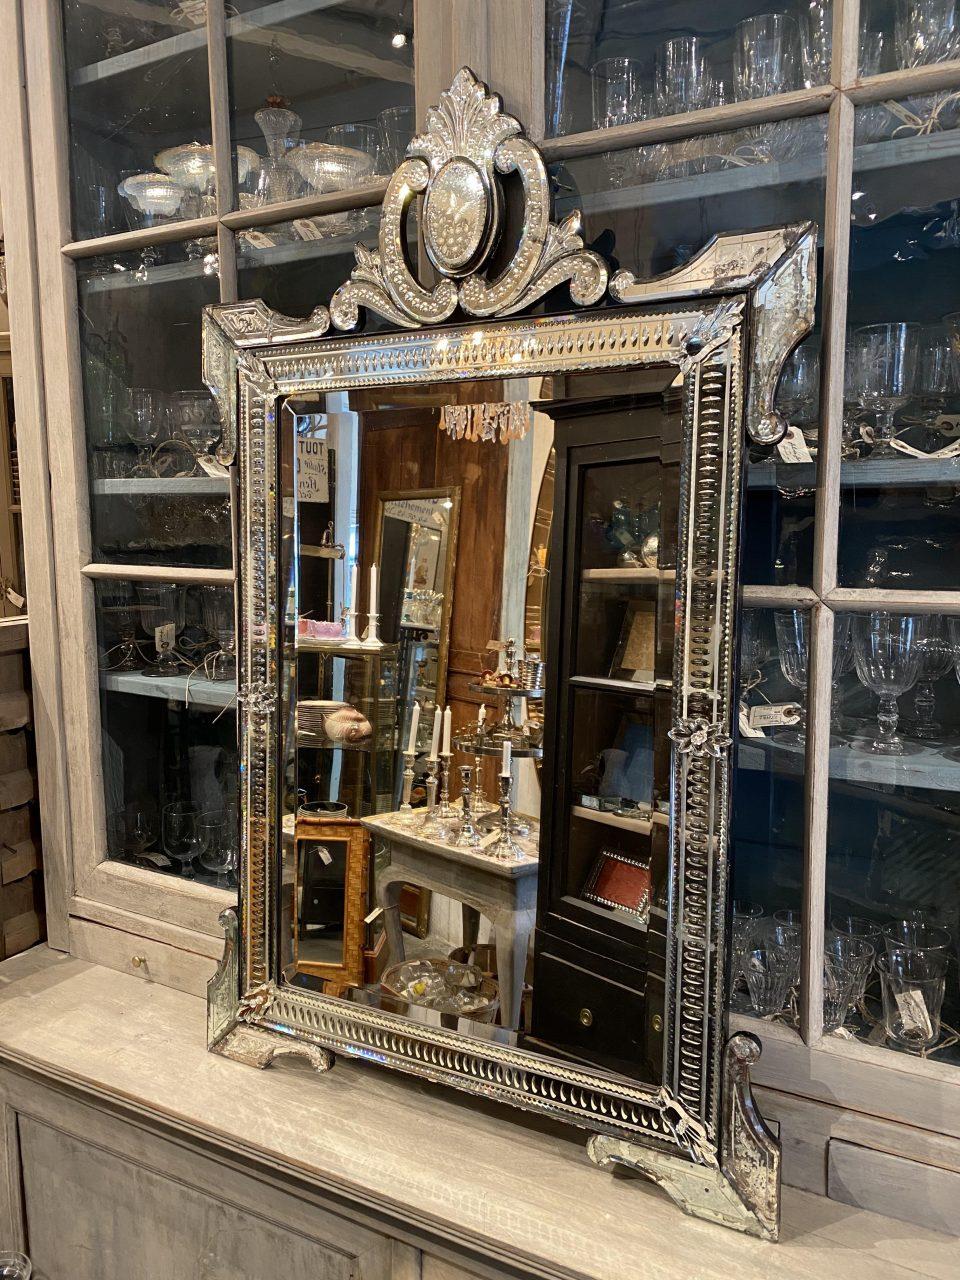 Magnificent and elegant rectangular Venetian mirror, from France circa 1920-30s. Stunning patina in all the mirror glass and the elegant pearl beading in the frame around the faceted mirror glass as well as the imposing and rare top piece that